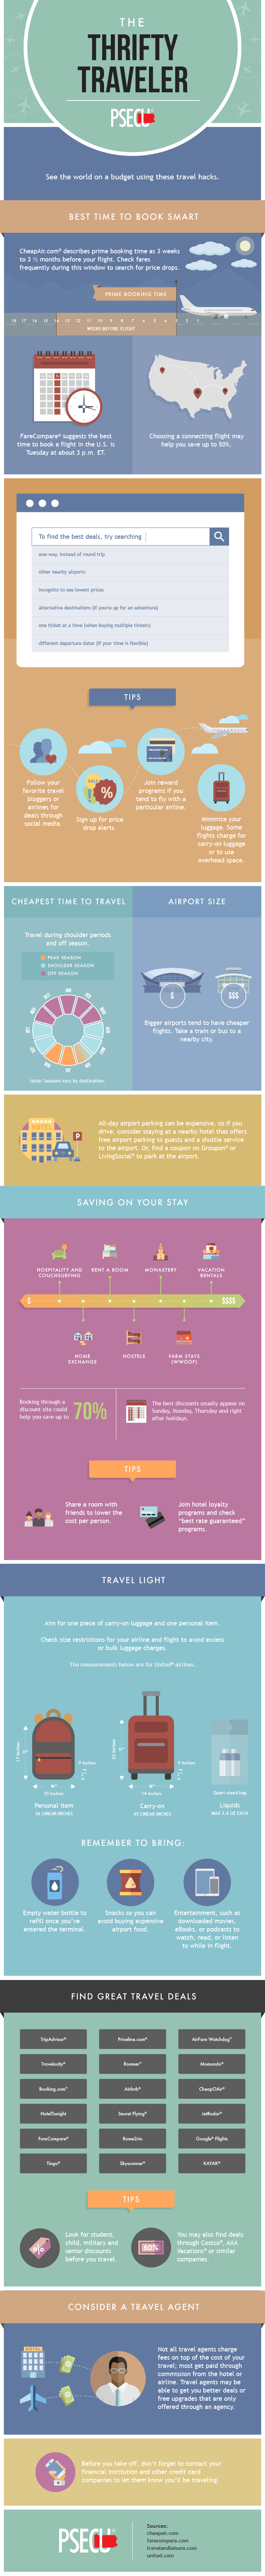 How to Be a Thrifty Traveler - Infographic